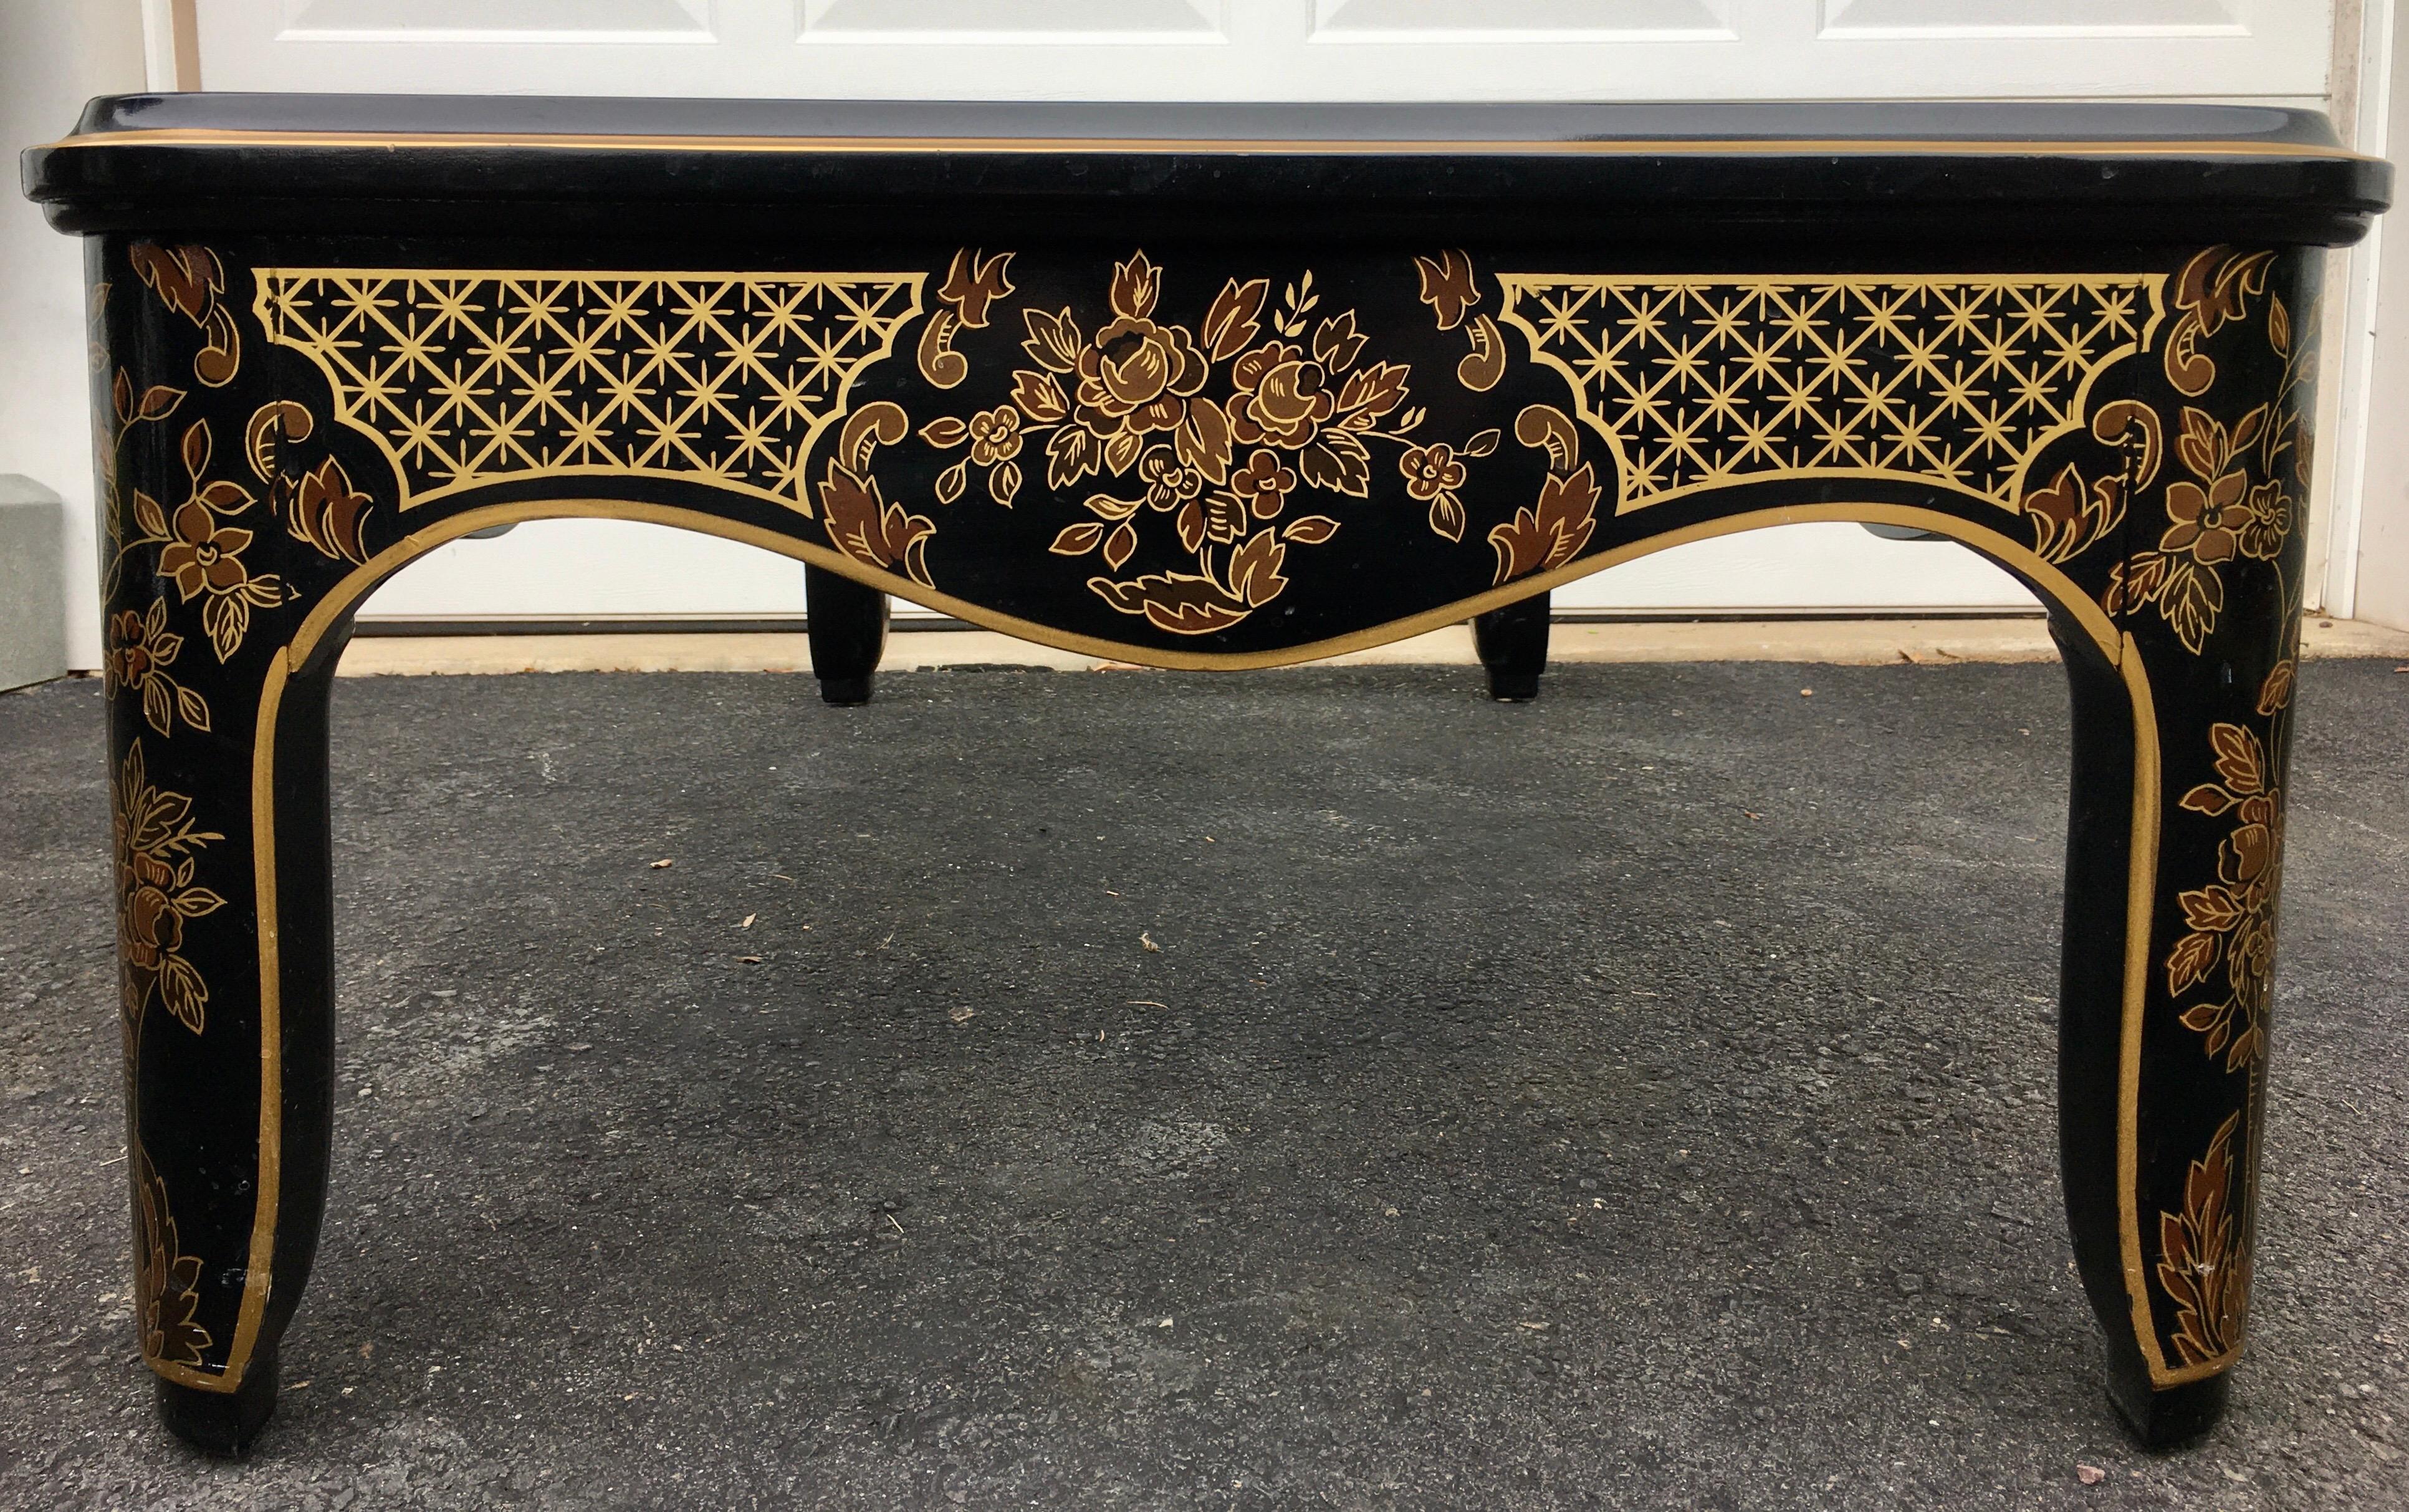 Glass Hollywood Regency Chinoiserie Black and Gold Coffee Table, Drexel Et Cetera